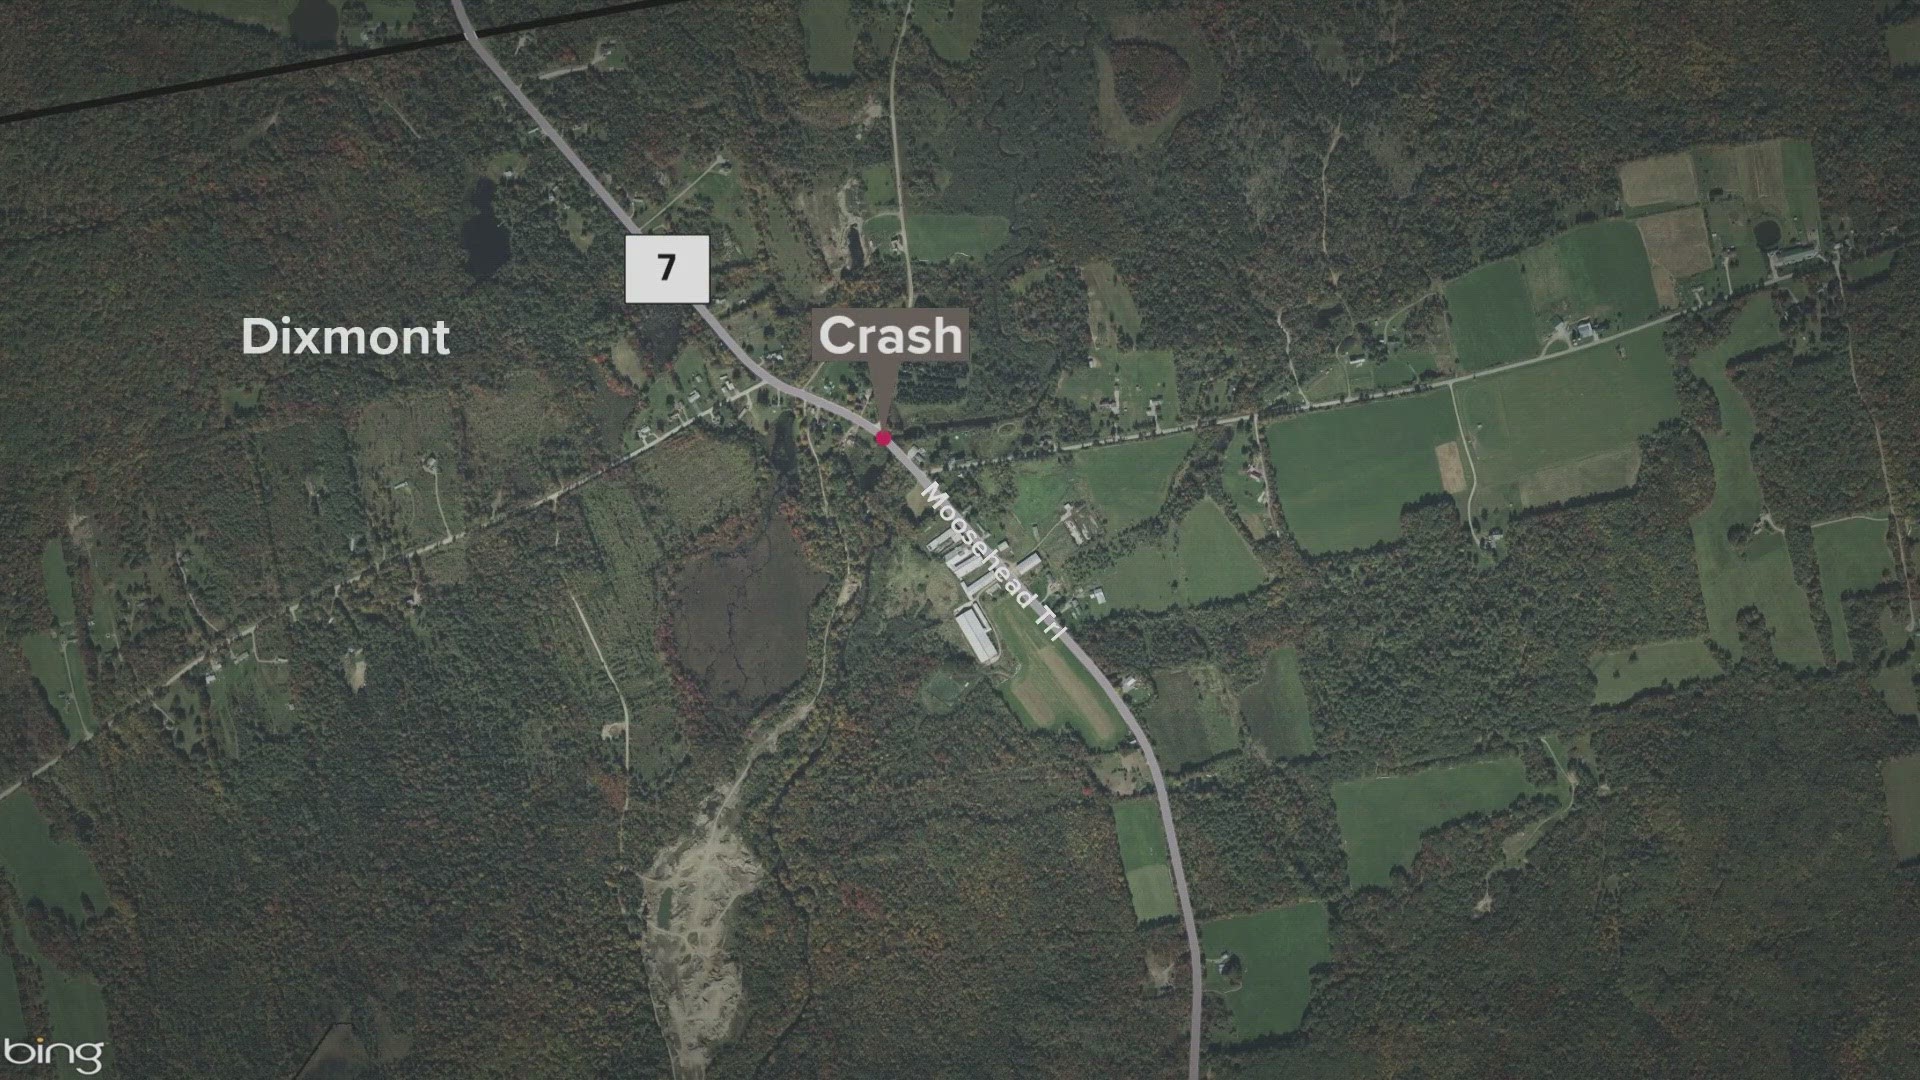 The driver, an adult female, was reportedly trapped inside the vehicle and had to be extricated, according to the Penobscot County Sheriff's Office.